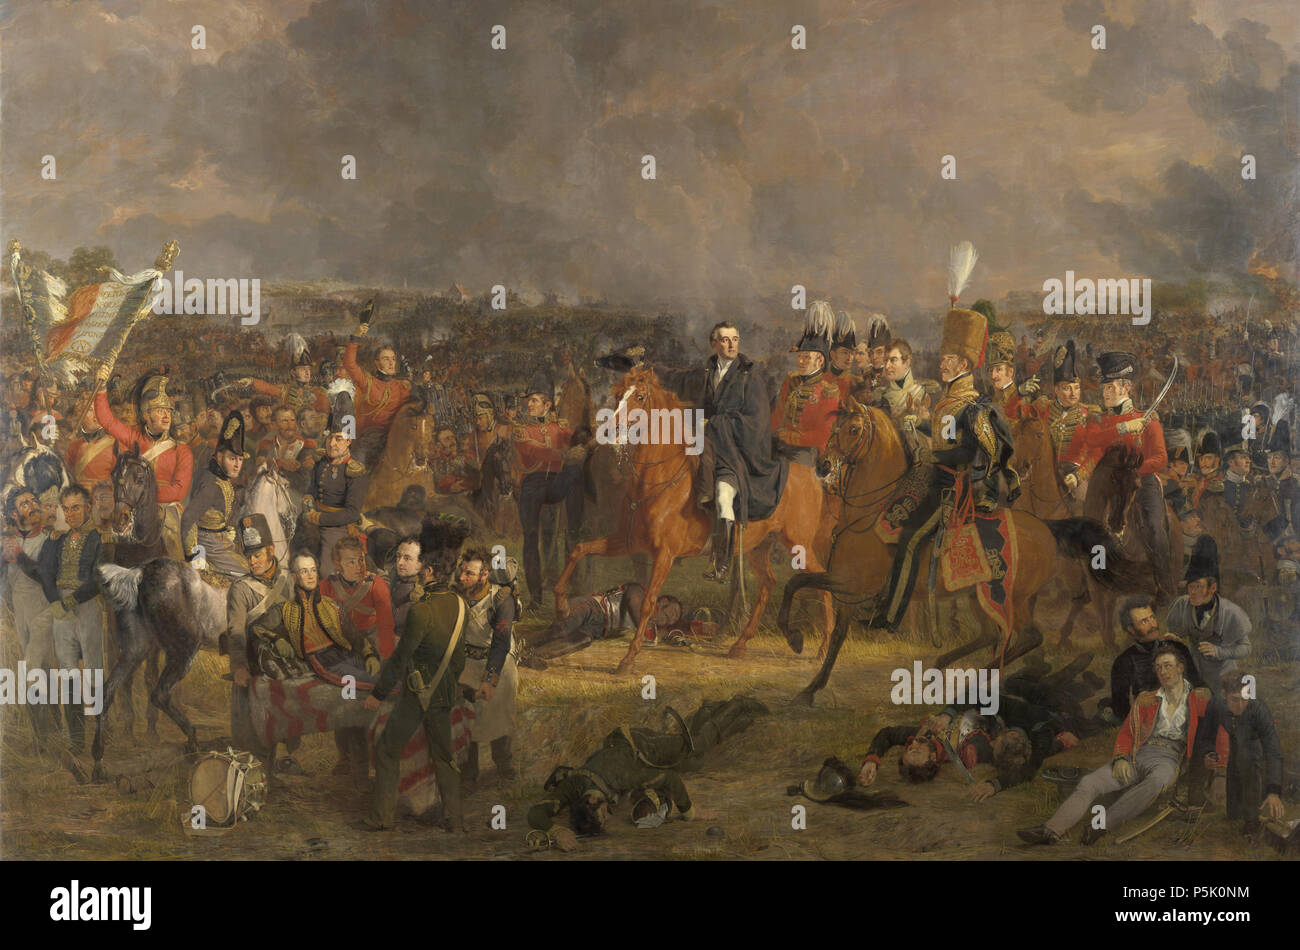 The Battle of Waterloo . The Battle of Waterloo, 18 June 1815. View of the battle field on the moment that the British commander Wellington receives the message that help from Prussian troops is underway. Bottom left the wounded Prince of Orange is being carried away. The commanders and other officers are depicted in the center on horseback. Bottom right a number of wounded and dead soldiers. In the background the battle is raging. The people portrayed include Lord Uxbridge, Sir Rowland Hill, Staff Colonel Sir William Delancey, Major-General George Cooke, Colonel Harvey, Colonel Campbell, lieu Stock Photo